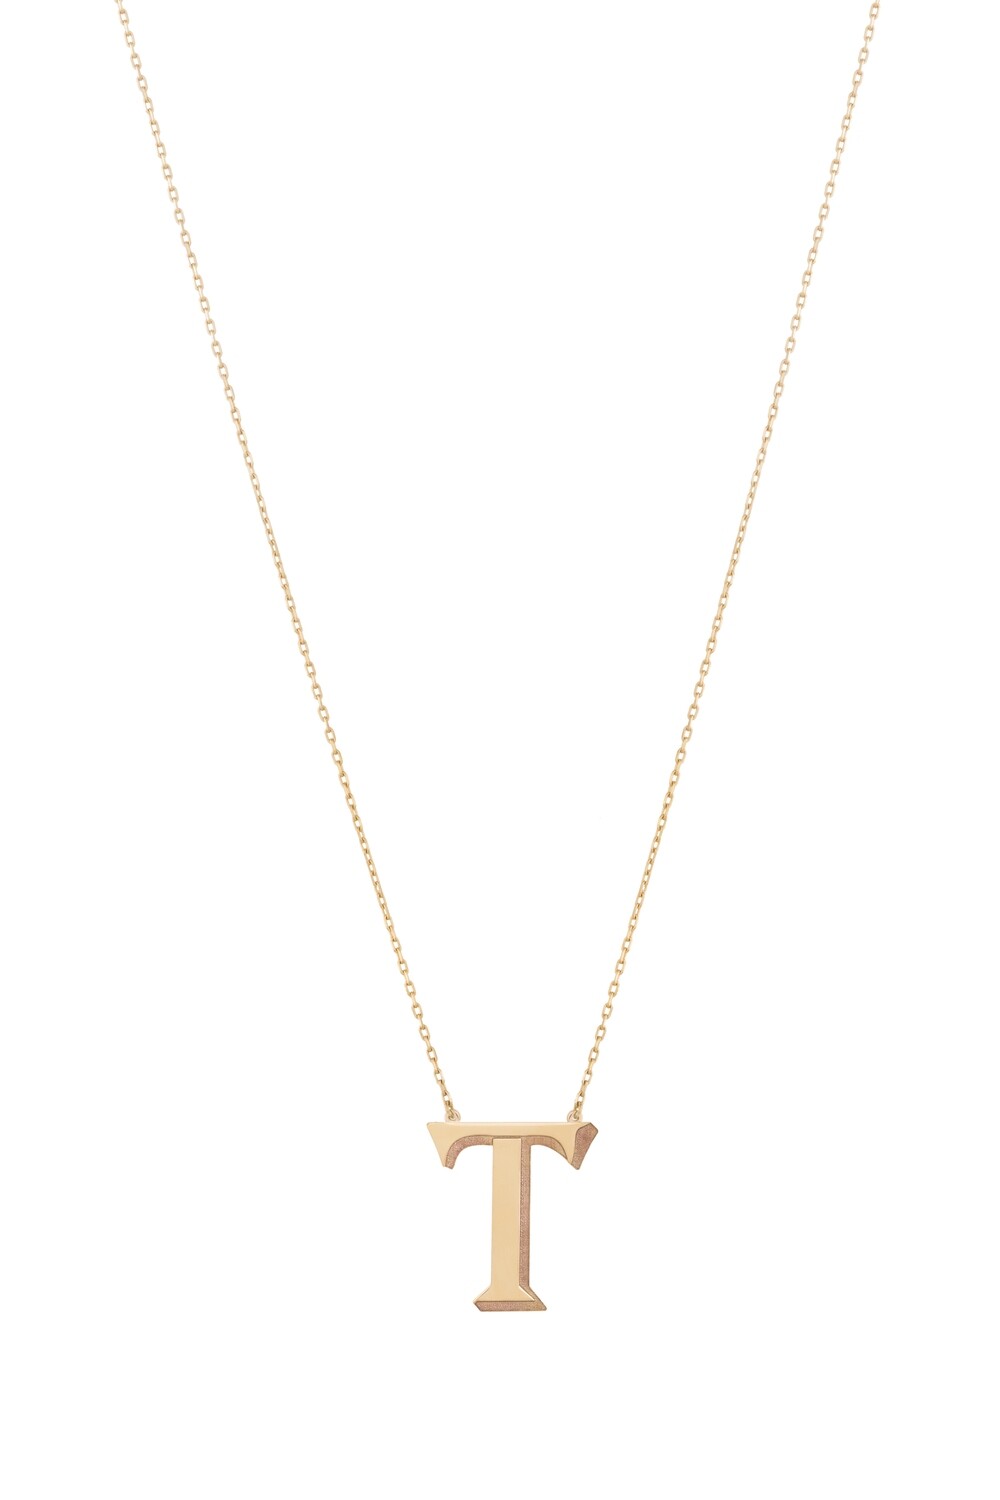 Initials Gold Necklace Letter T